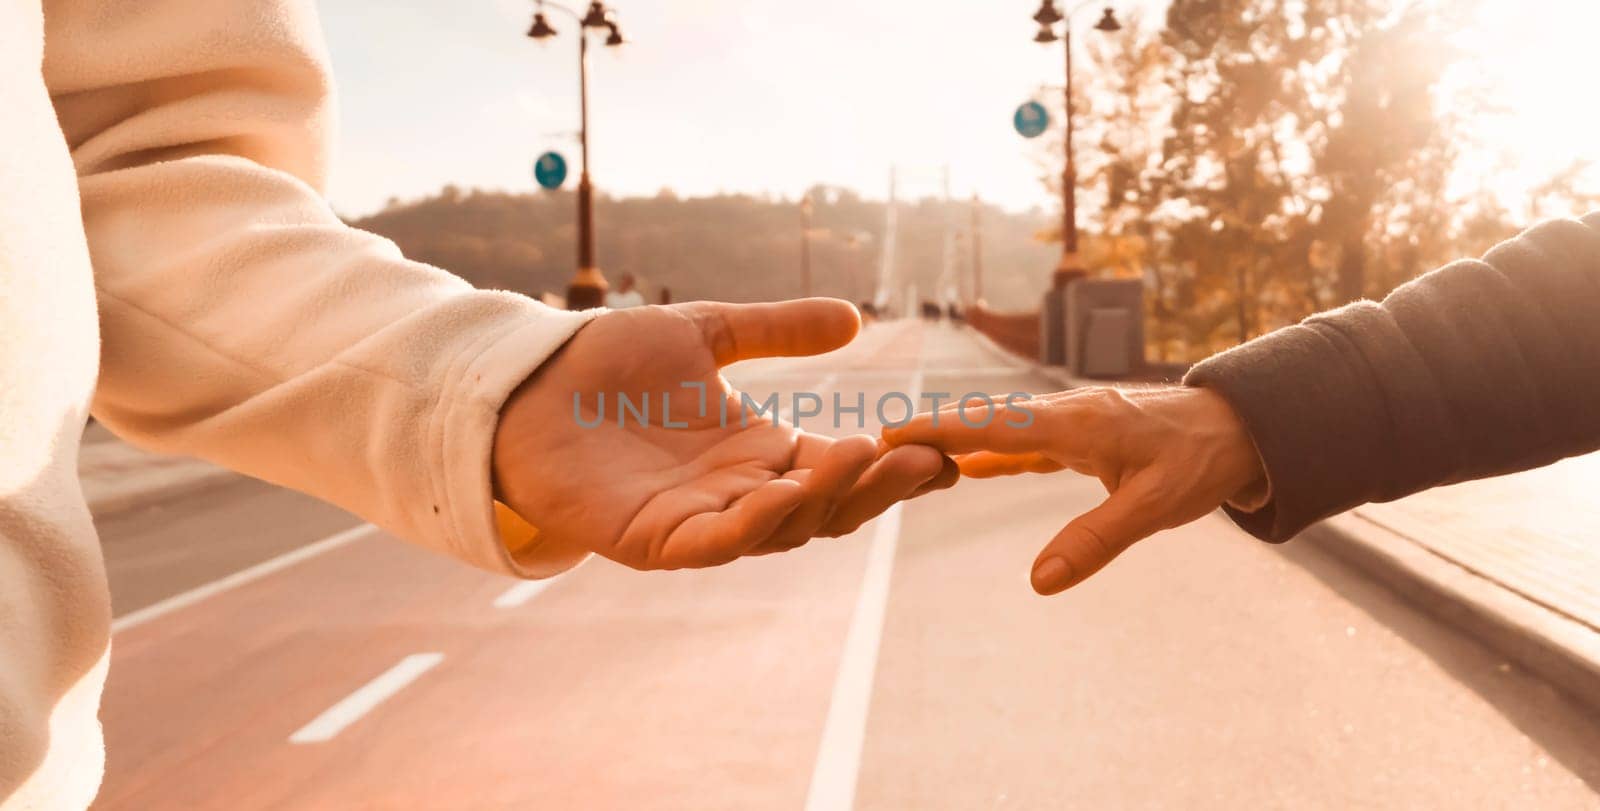 Сouple holding hands, with love and care support each other and walk together in the park on a sunny day, lead an active healthy lifestyle. A man holds the hand of a beloved wife.